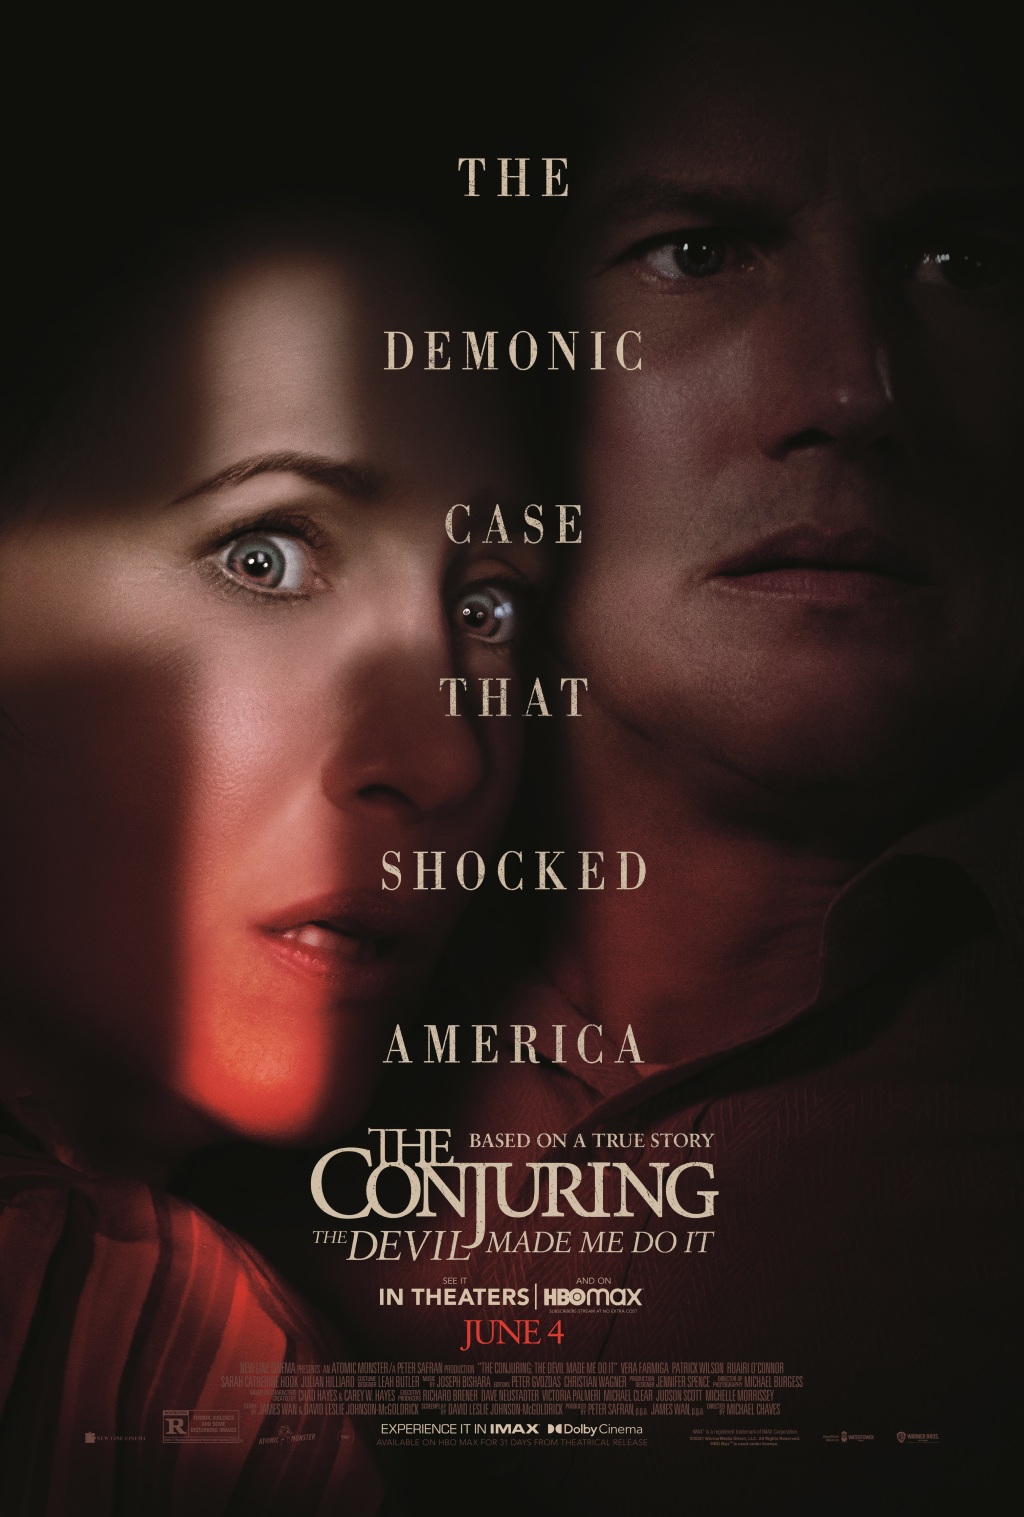 Warner Bros Releases New Poster From Next Installment of The Conjuring, Starring Vera Farmiga and Patrick Wilson